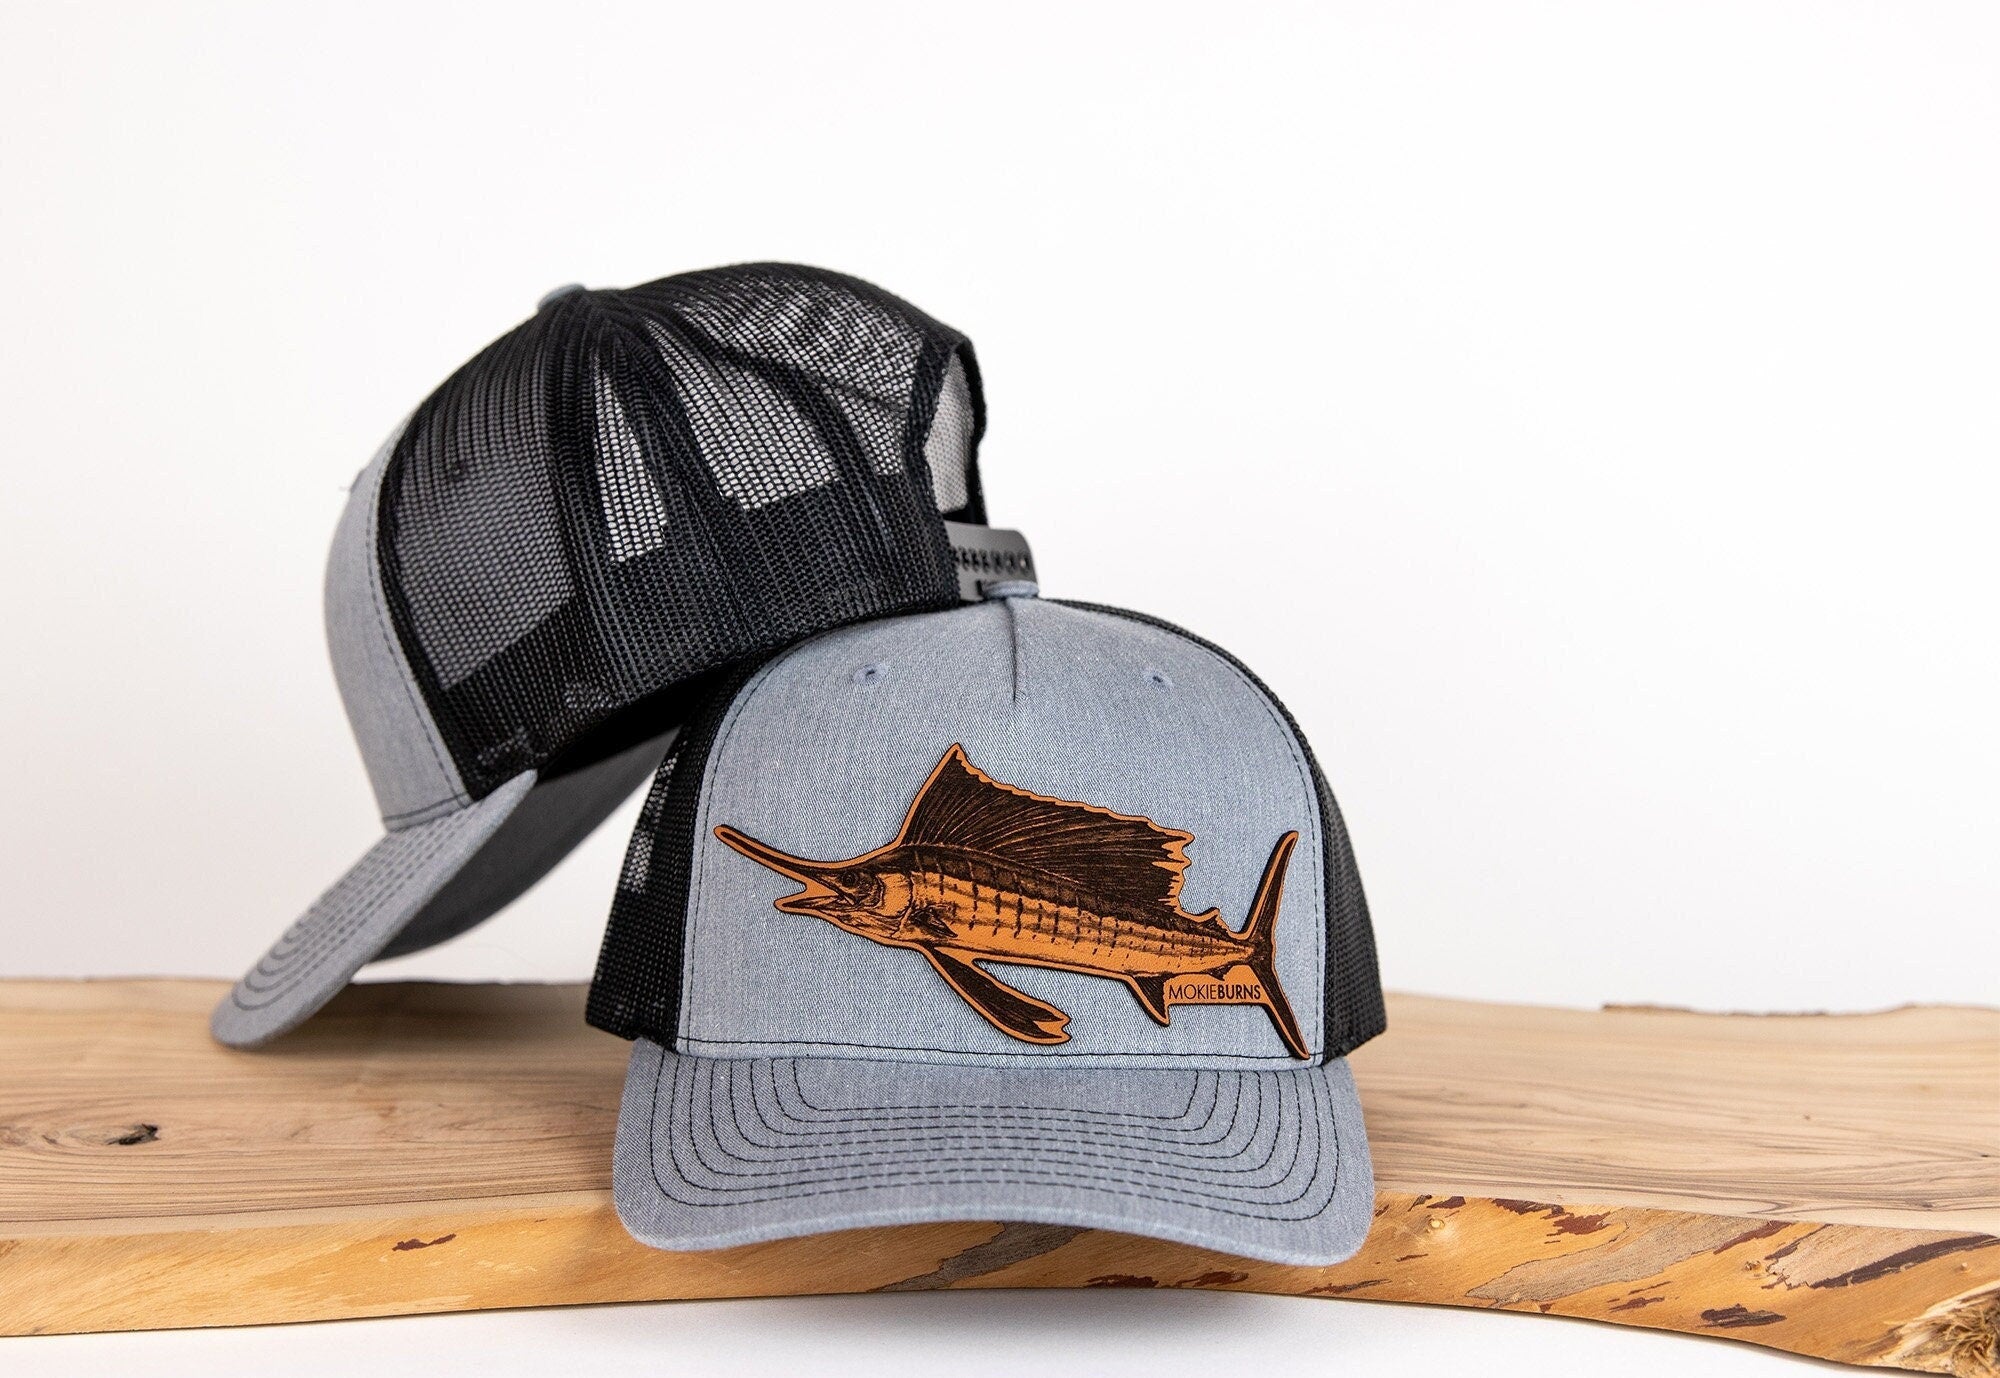 Fishing Trucker Hat - Sailfish Leather Patch, Offshore Fishing Apparel Gift for Men, Ladies Trucker Hat Gift, billfishing Gift for Dad